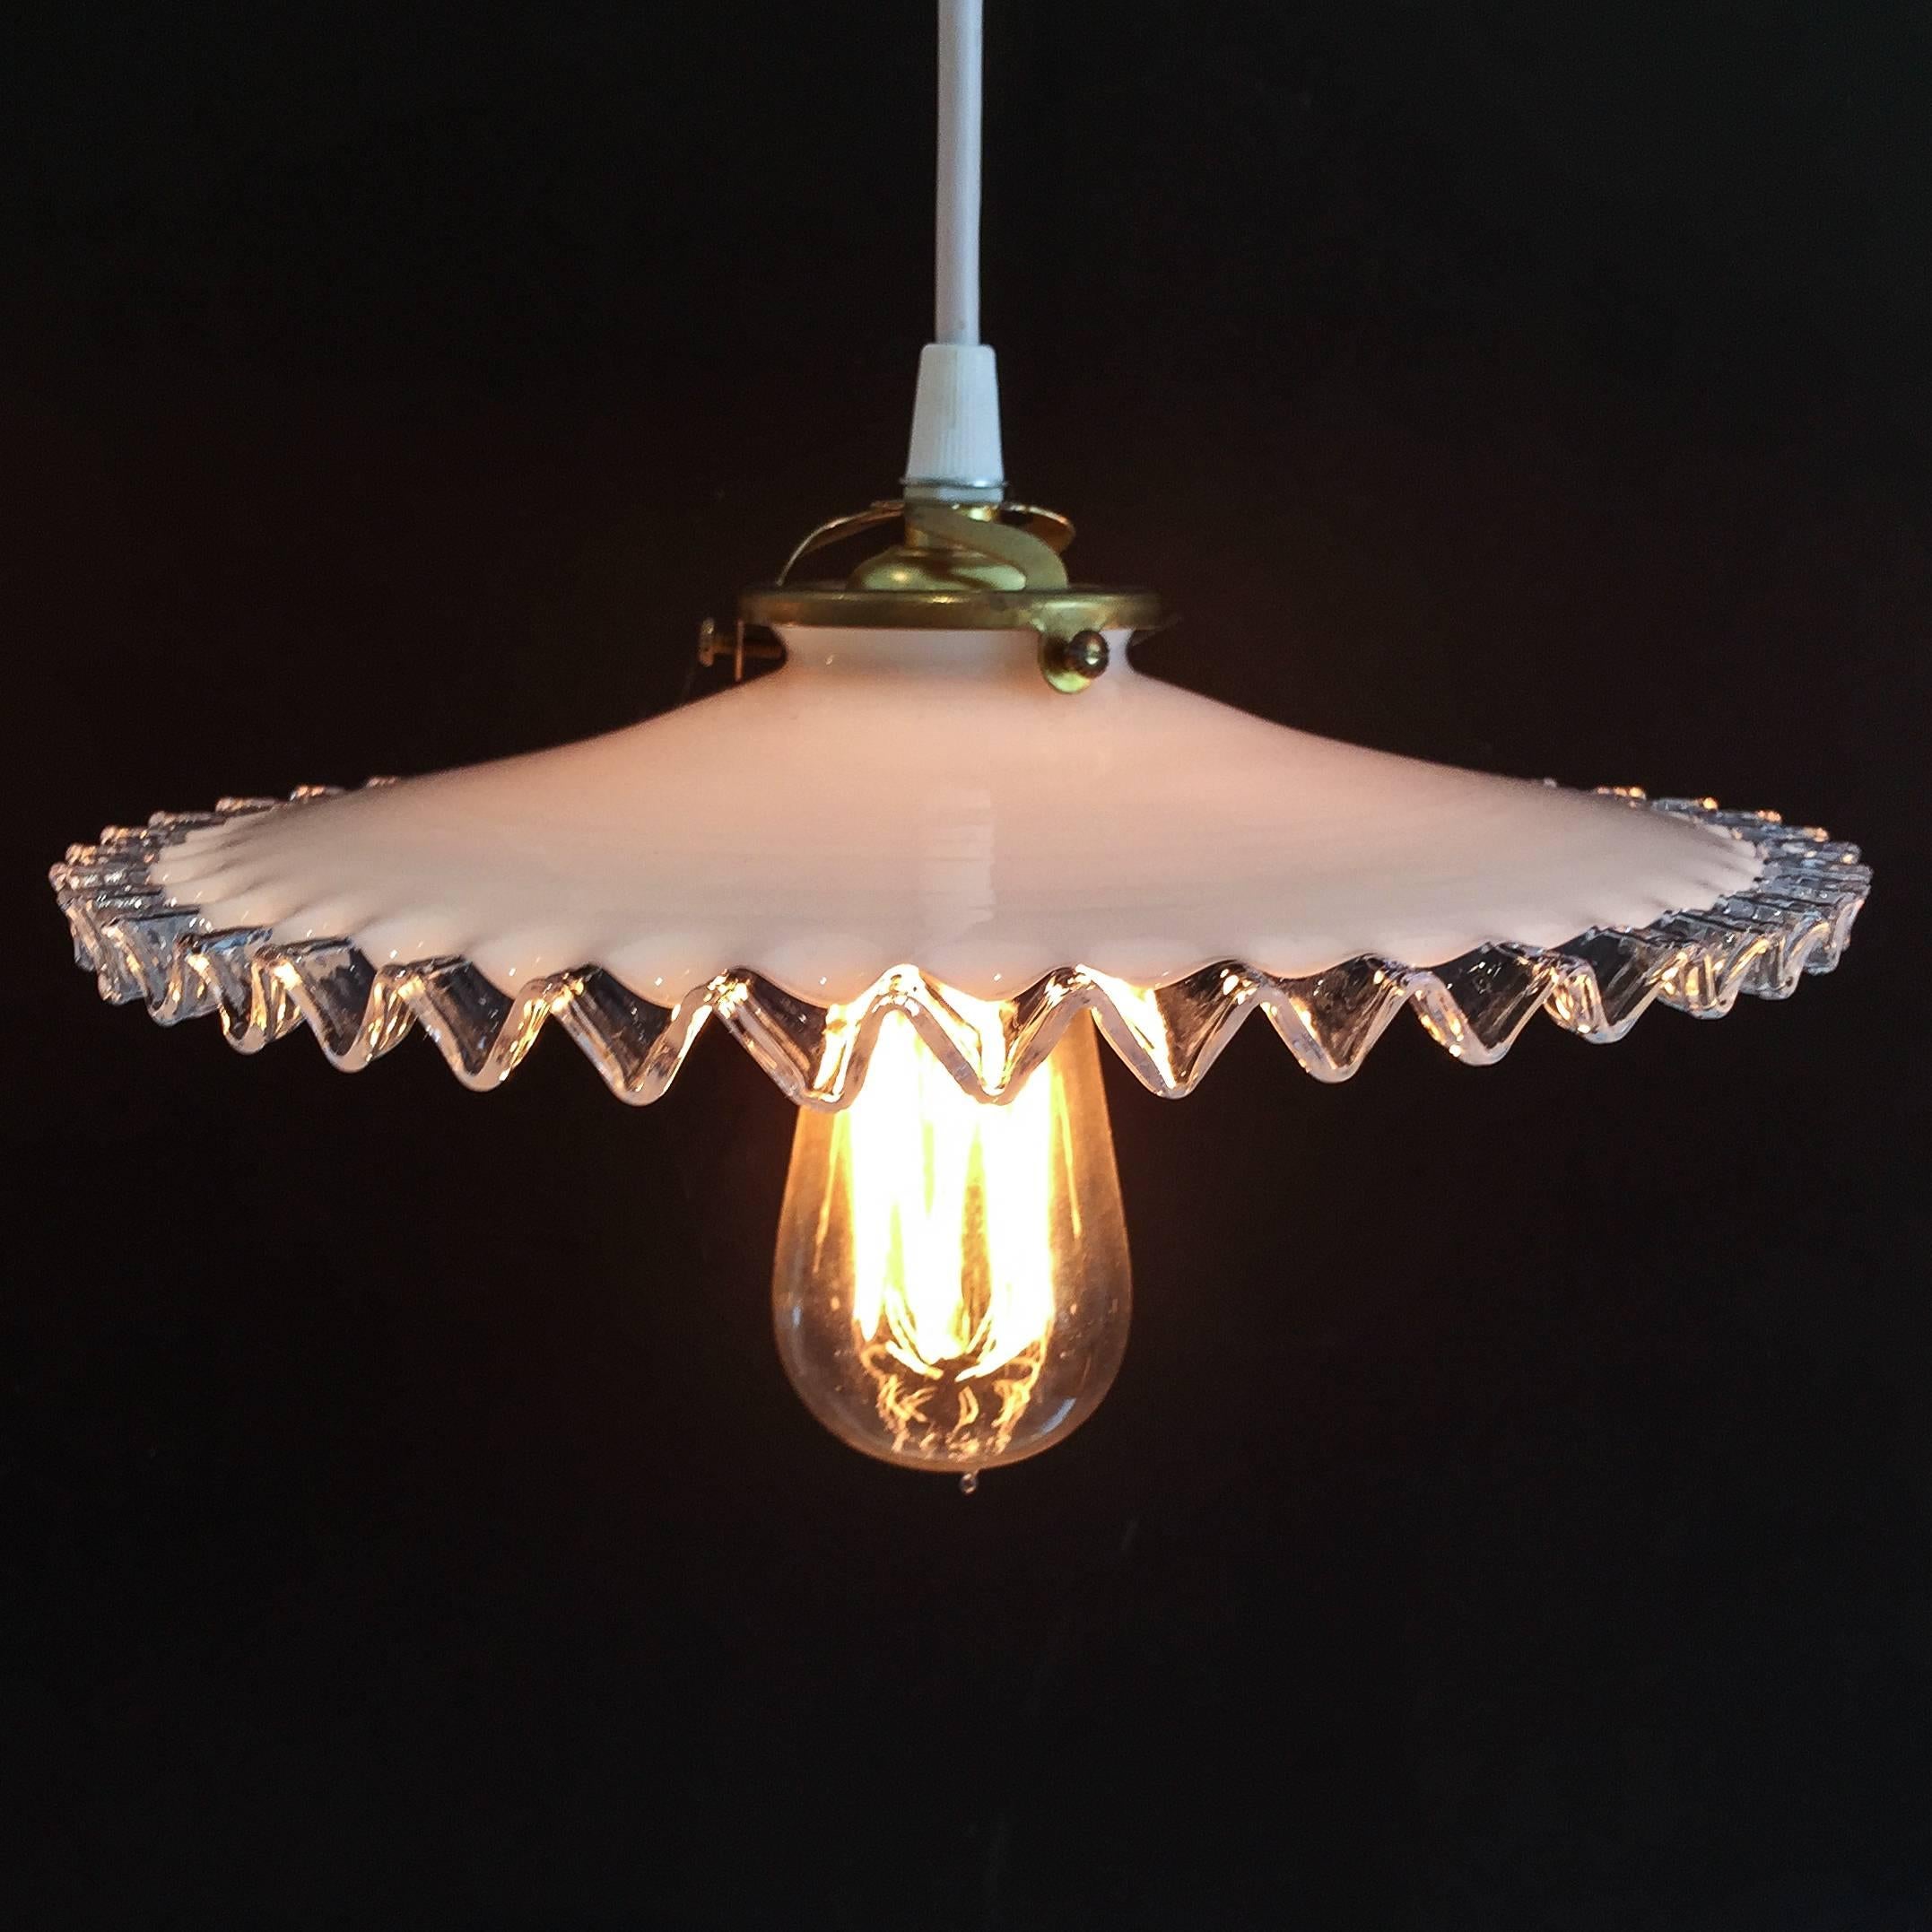 A Dawn Hill Antiques exclusive, these French hanging lights with milk glass ripple shades, are each assembled by us using late 19th century shades that we find in France. Each shade is antique, and has slight charming differences to them. They can